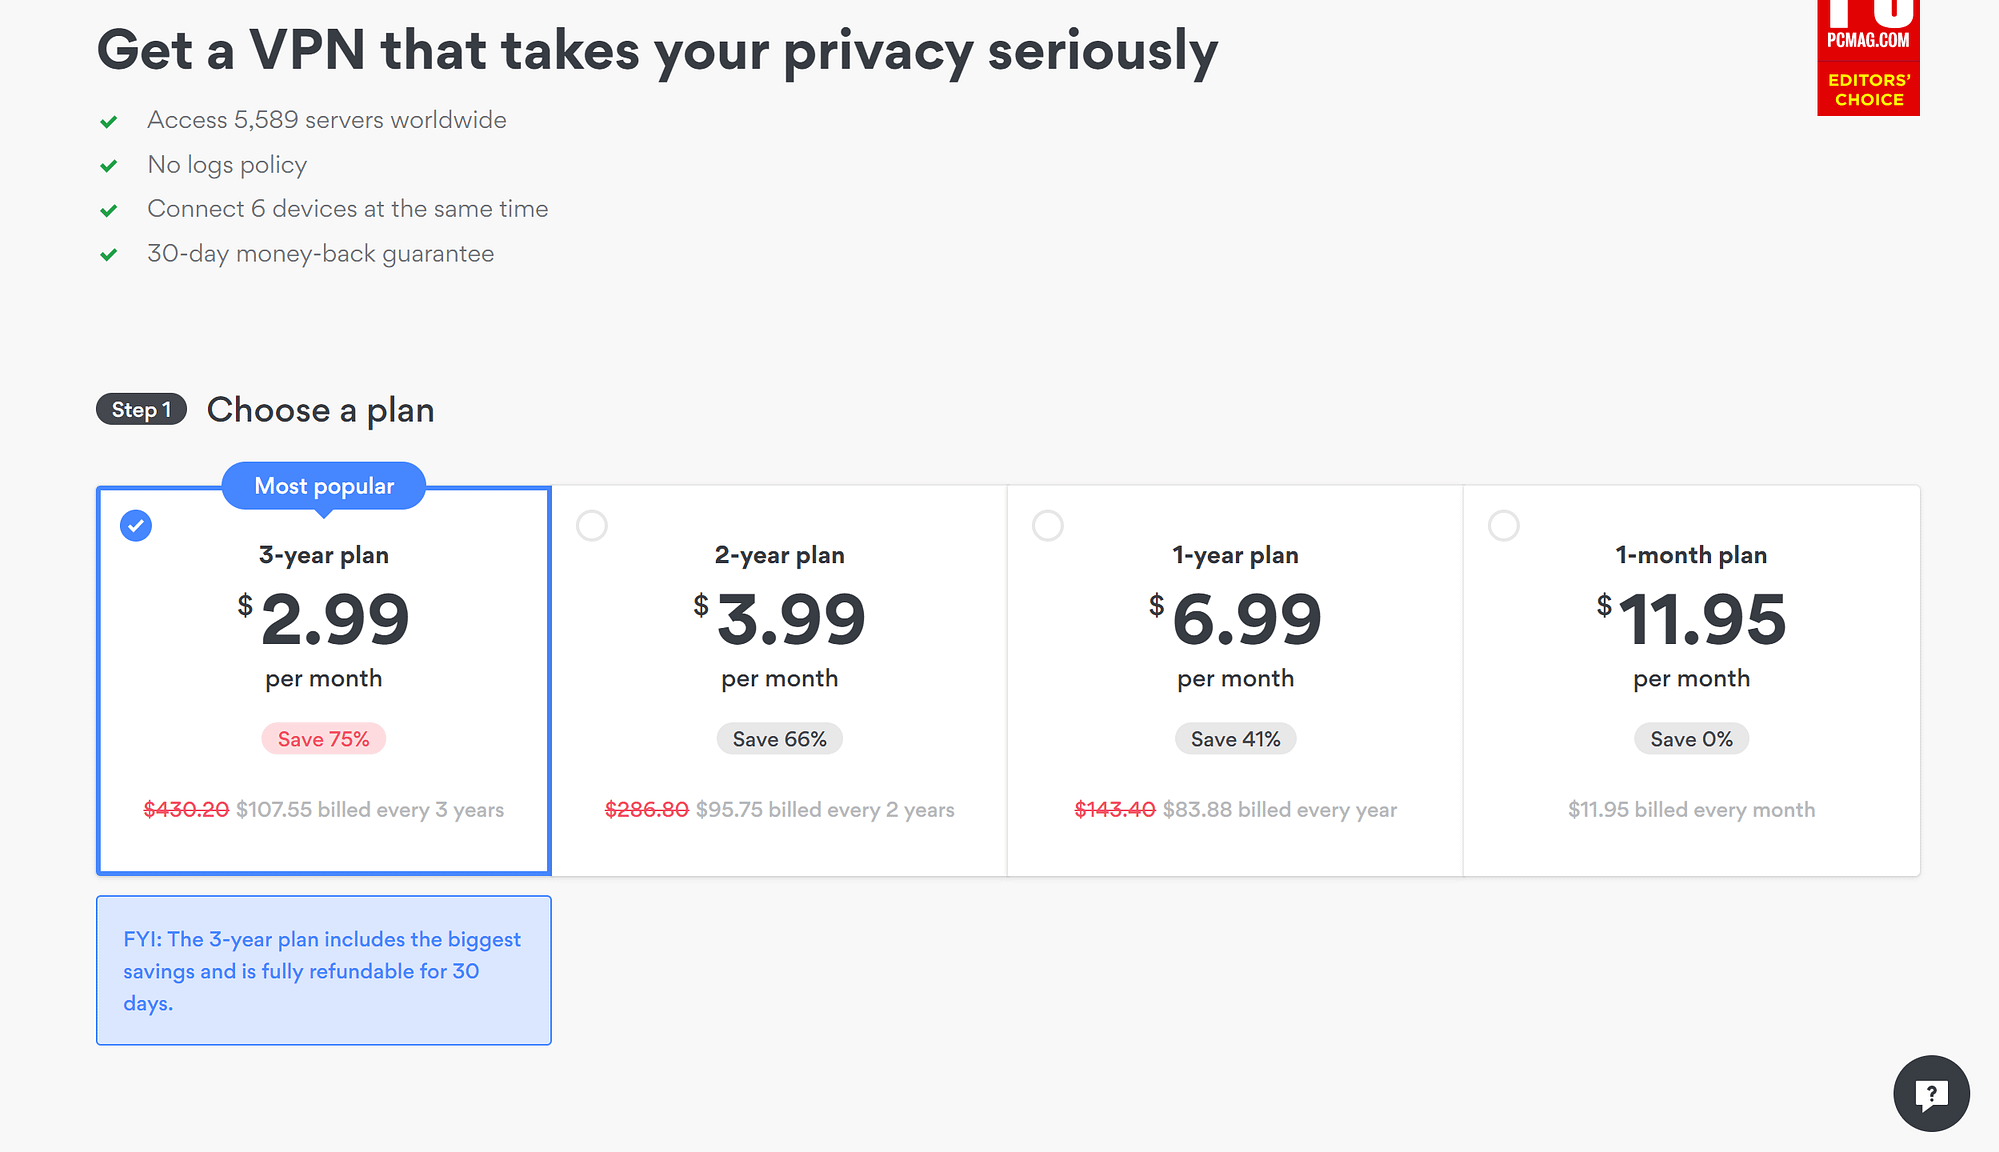 How much does a VPN cost per month?